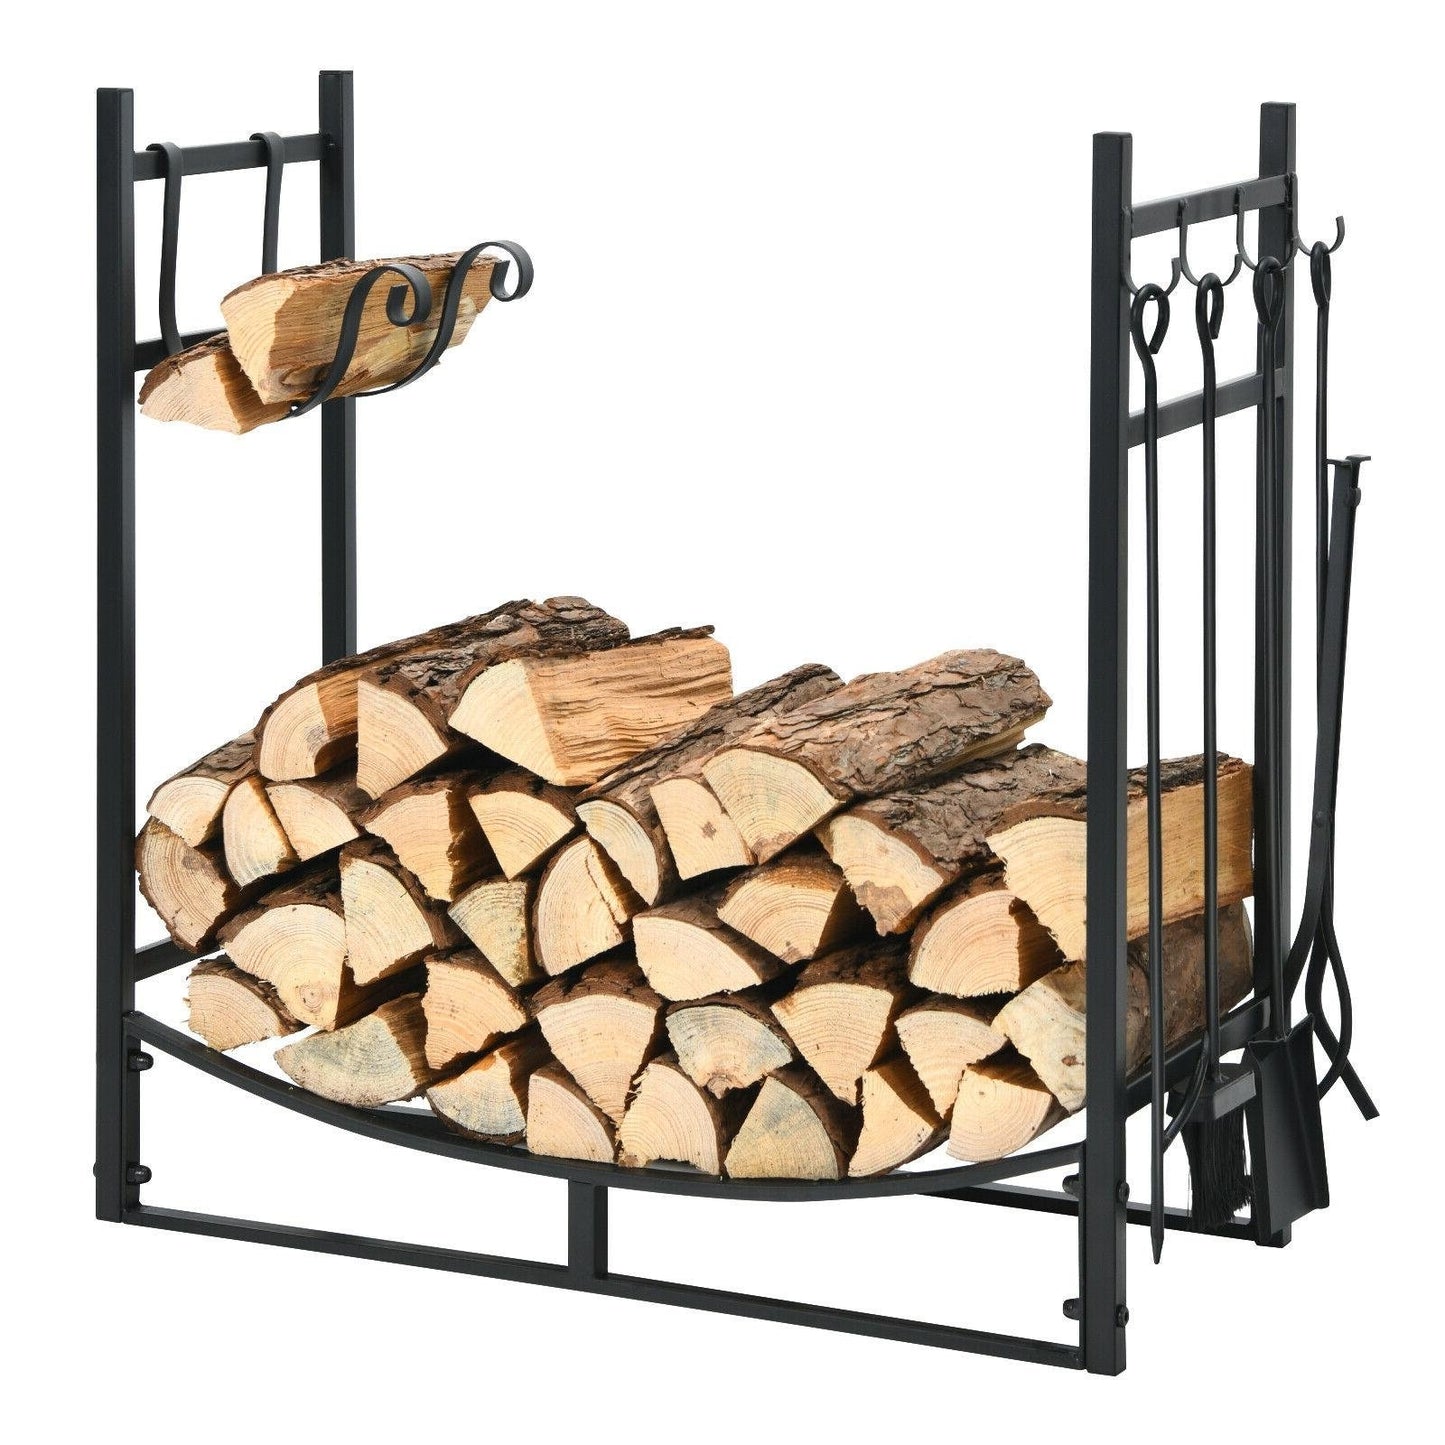 30 Inch Firewood Rack with 4 Tool Set Kindling Holders for Indoor and Outdoor, Black